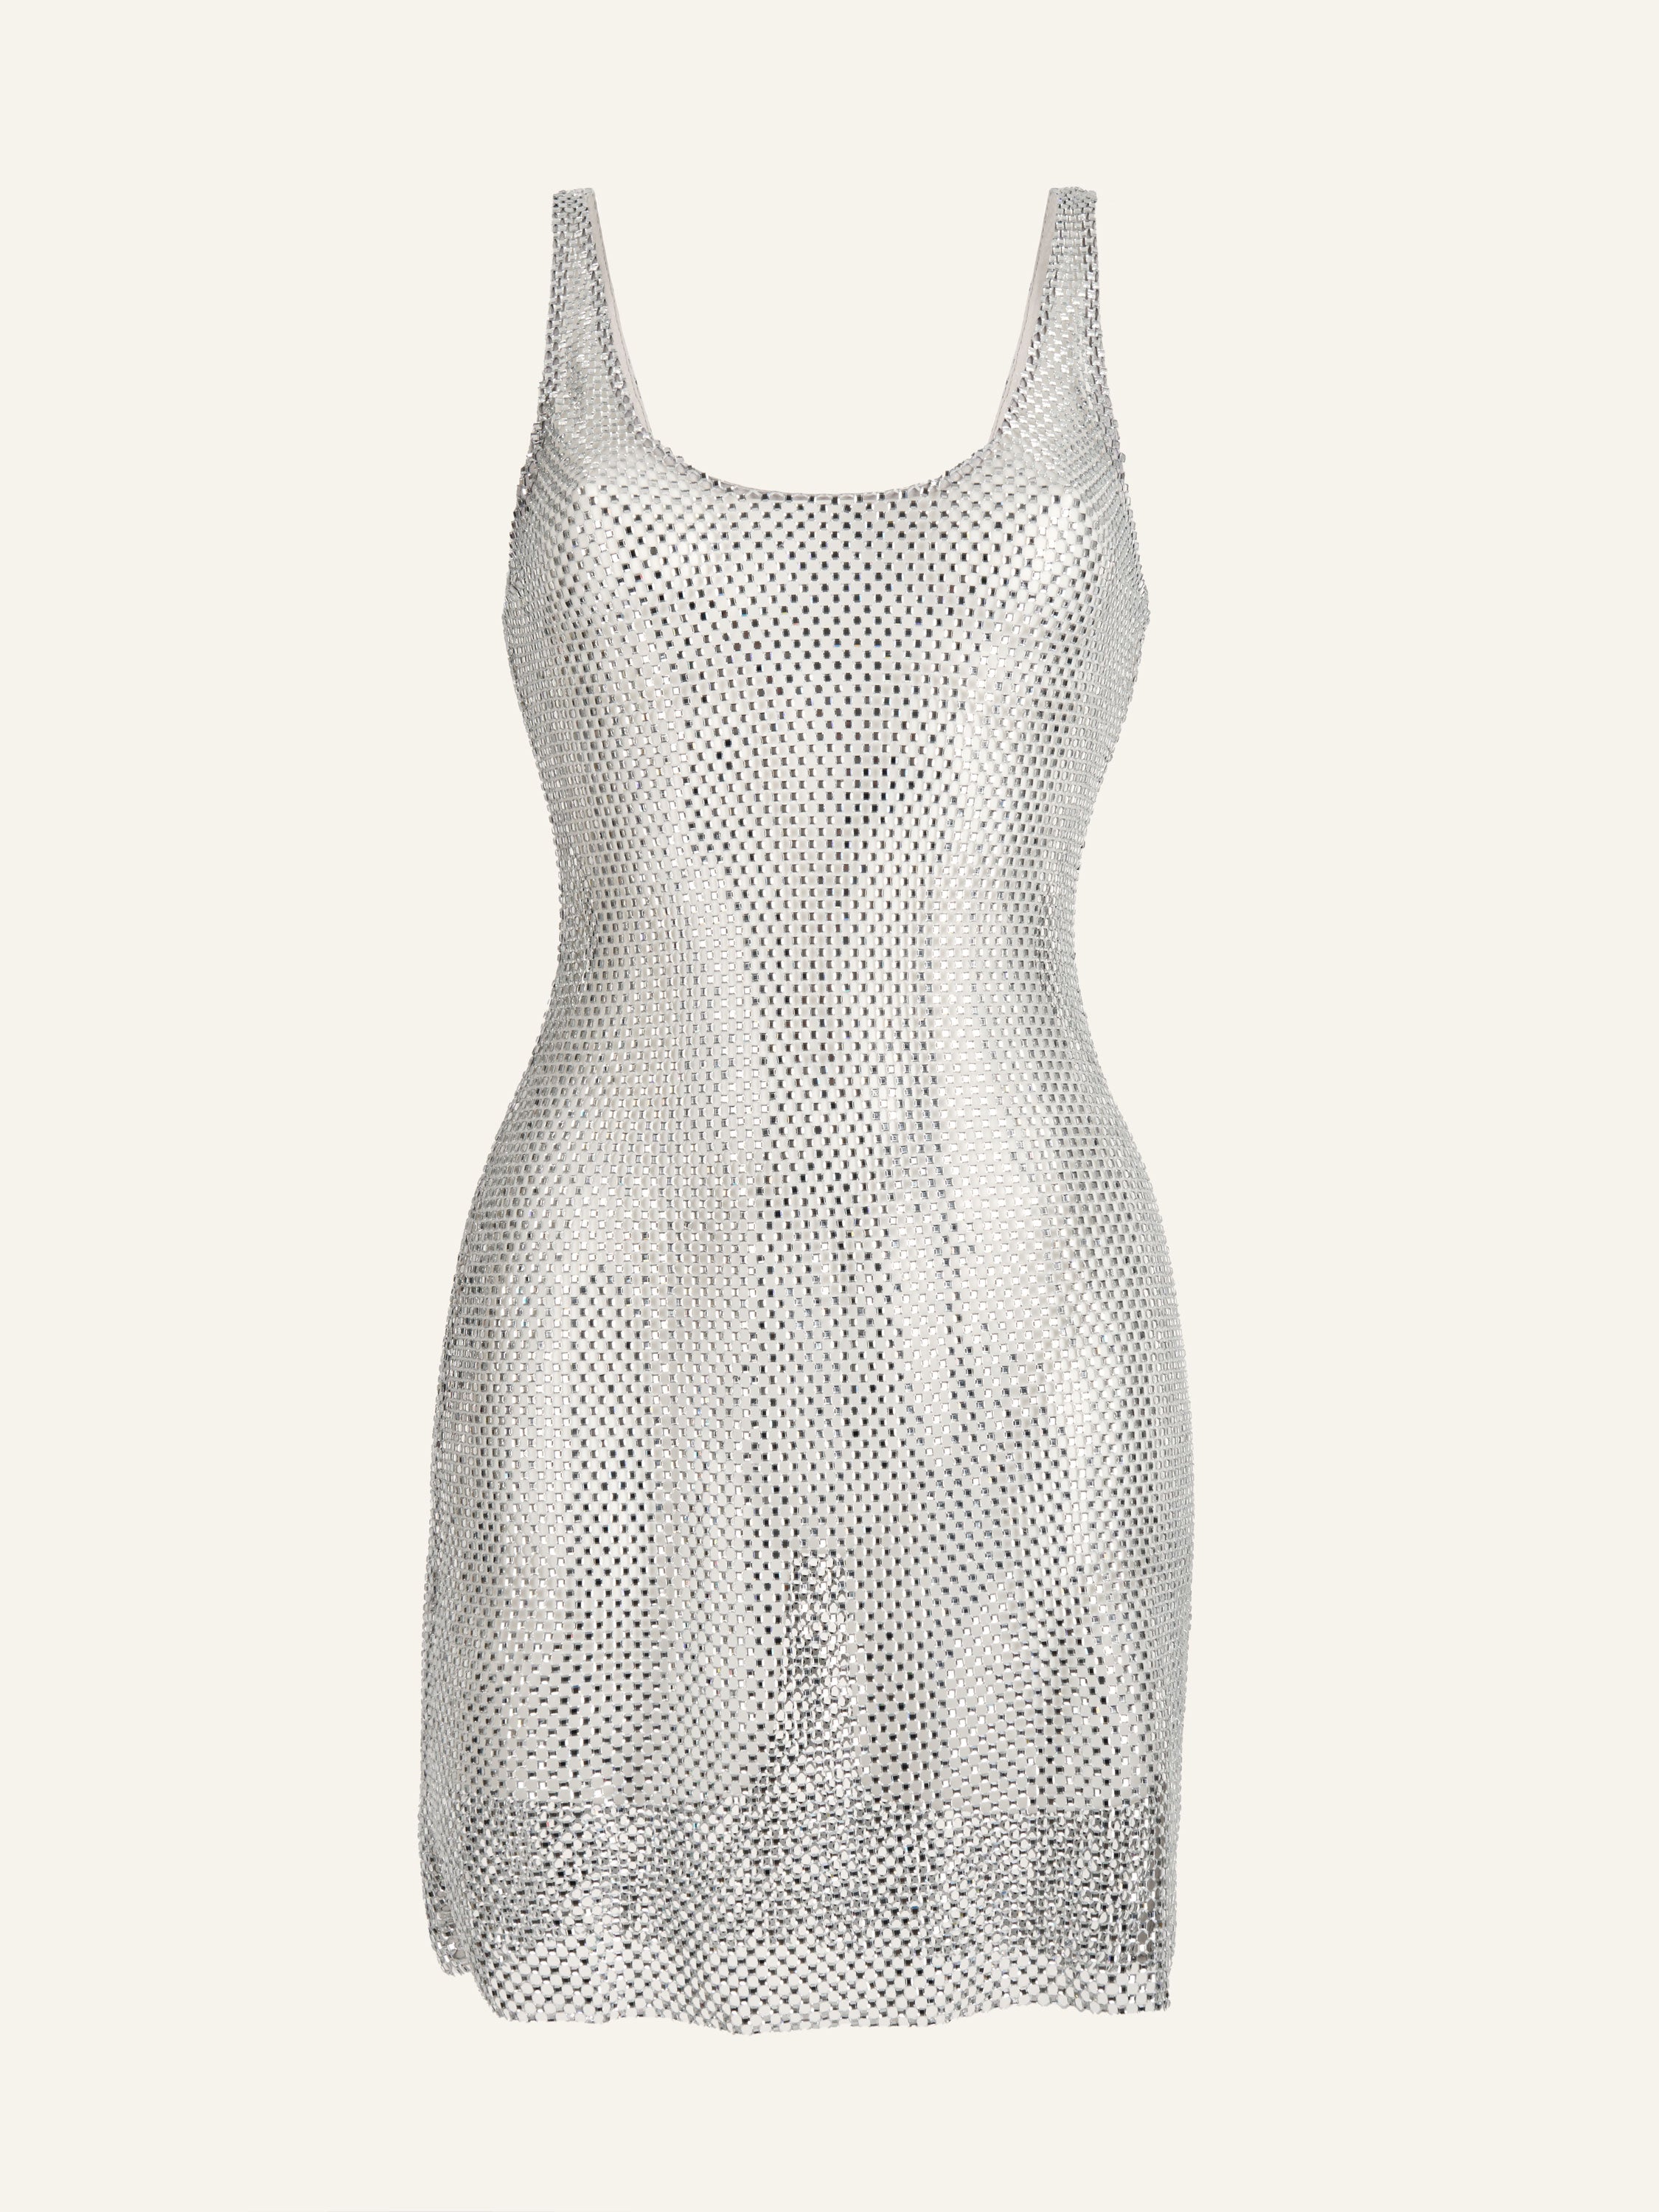 Product photo of a grey net short tank dress decorated with rhinestones